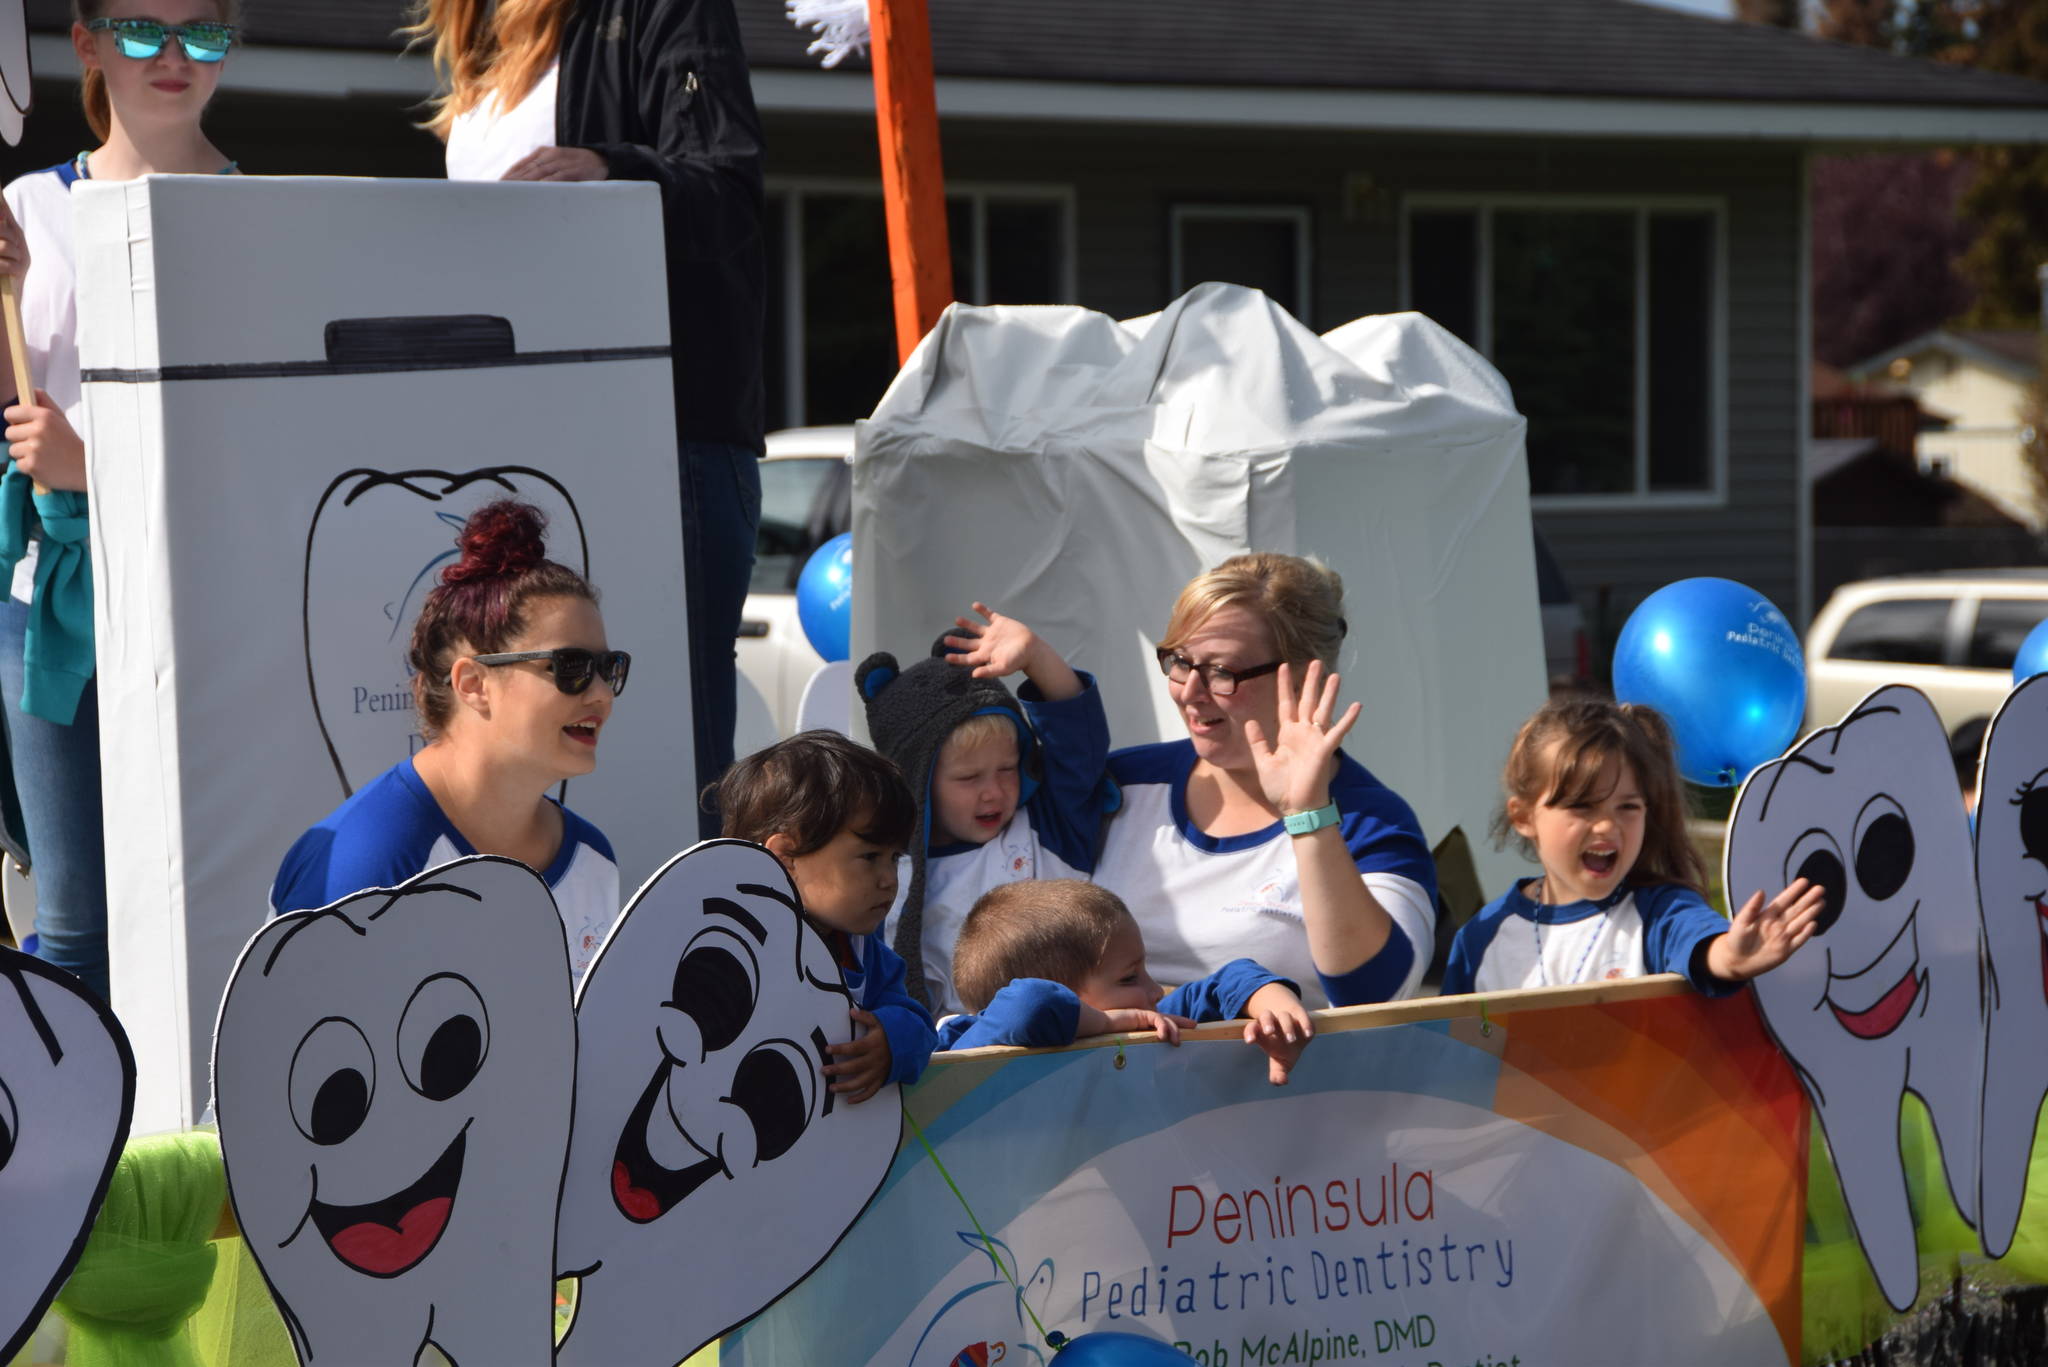 Volunteers from Peninsula Pediatric Dentistry wave to the crowd during Soldotna’s Progress Day Parade in Soldotna, Alaska on July 27, 2019. (Photo by Brian Mazurek/Peninsula Clarion)